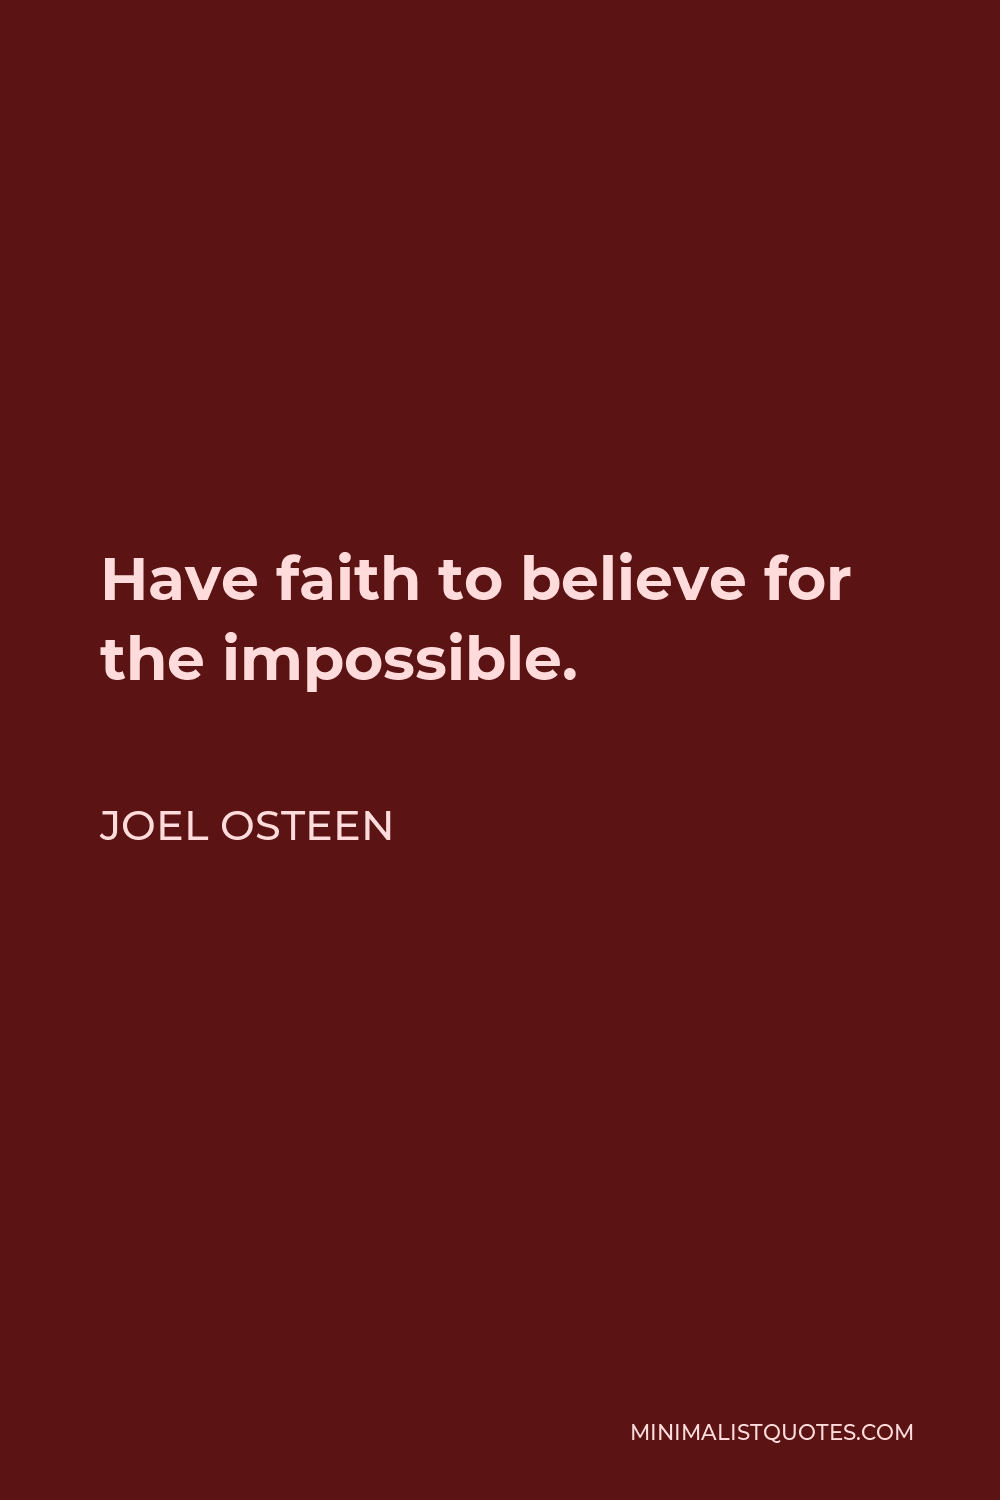 Joel Osteen Quote - Have faith to believe for the impossible.